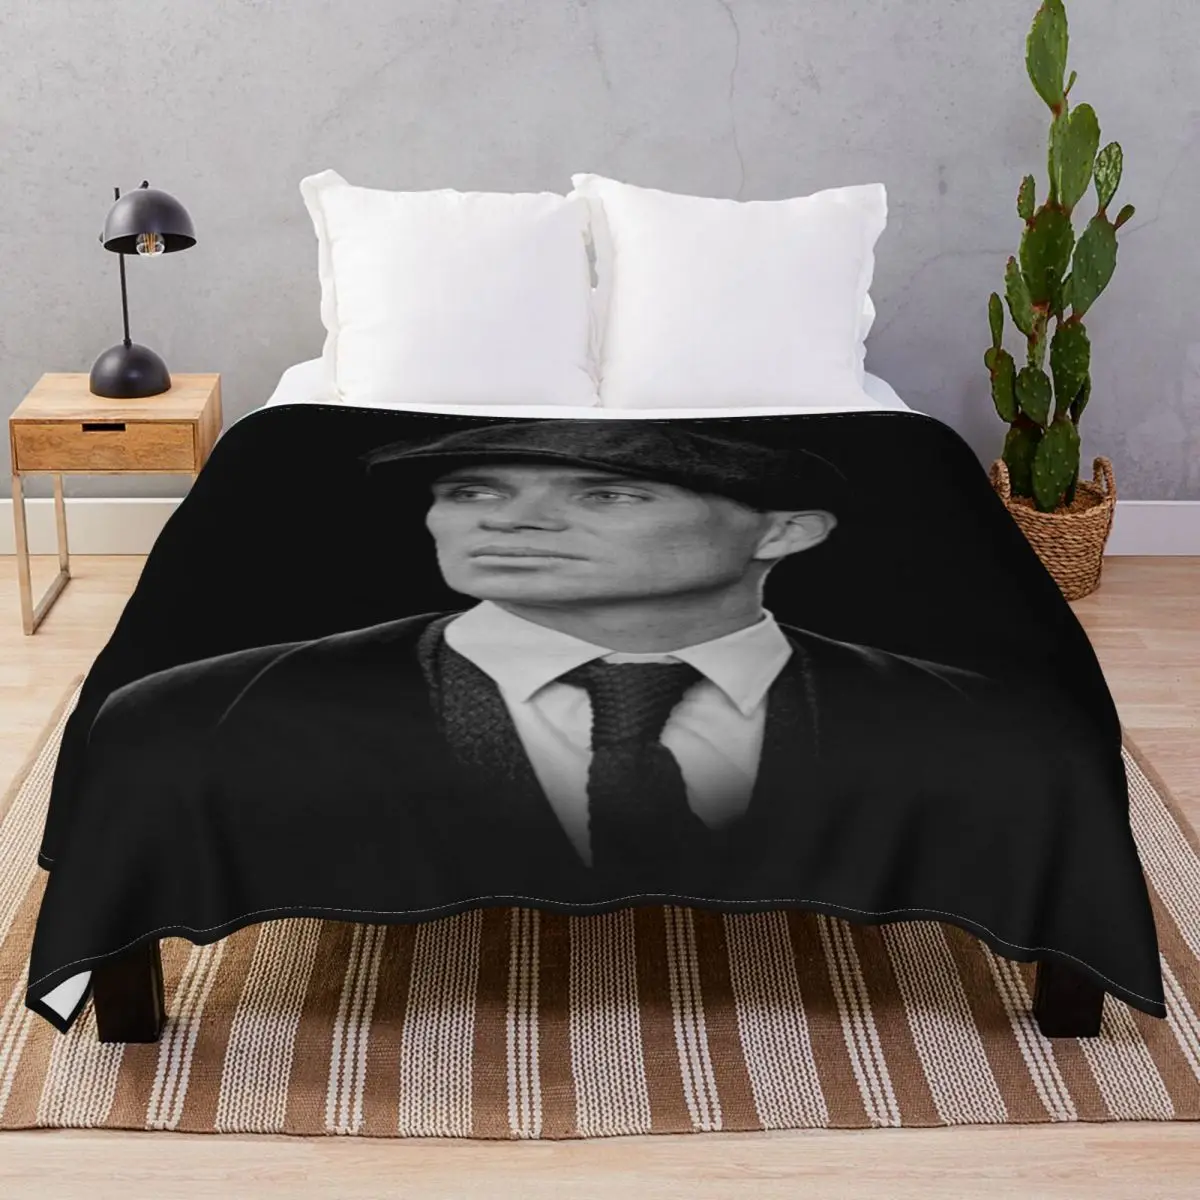 Tommy Shelby BN Blankets Flannel Plush Print Lightweight Throw Blanket for Bed Home Couch Travel Cinema